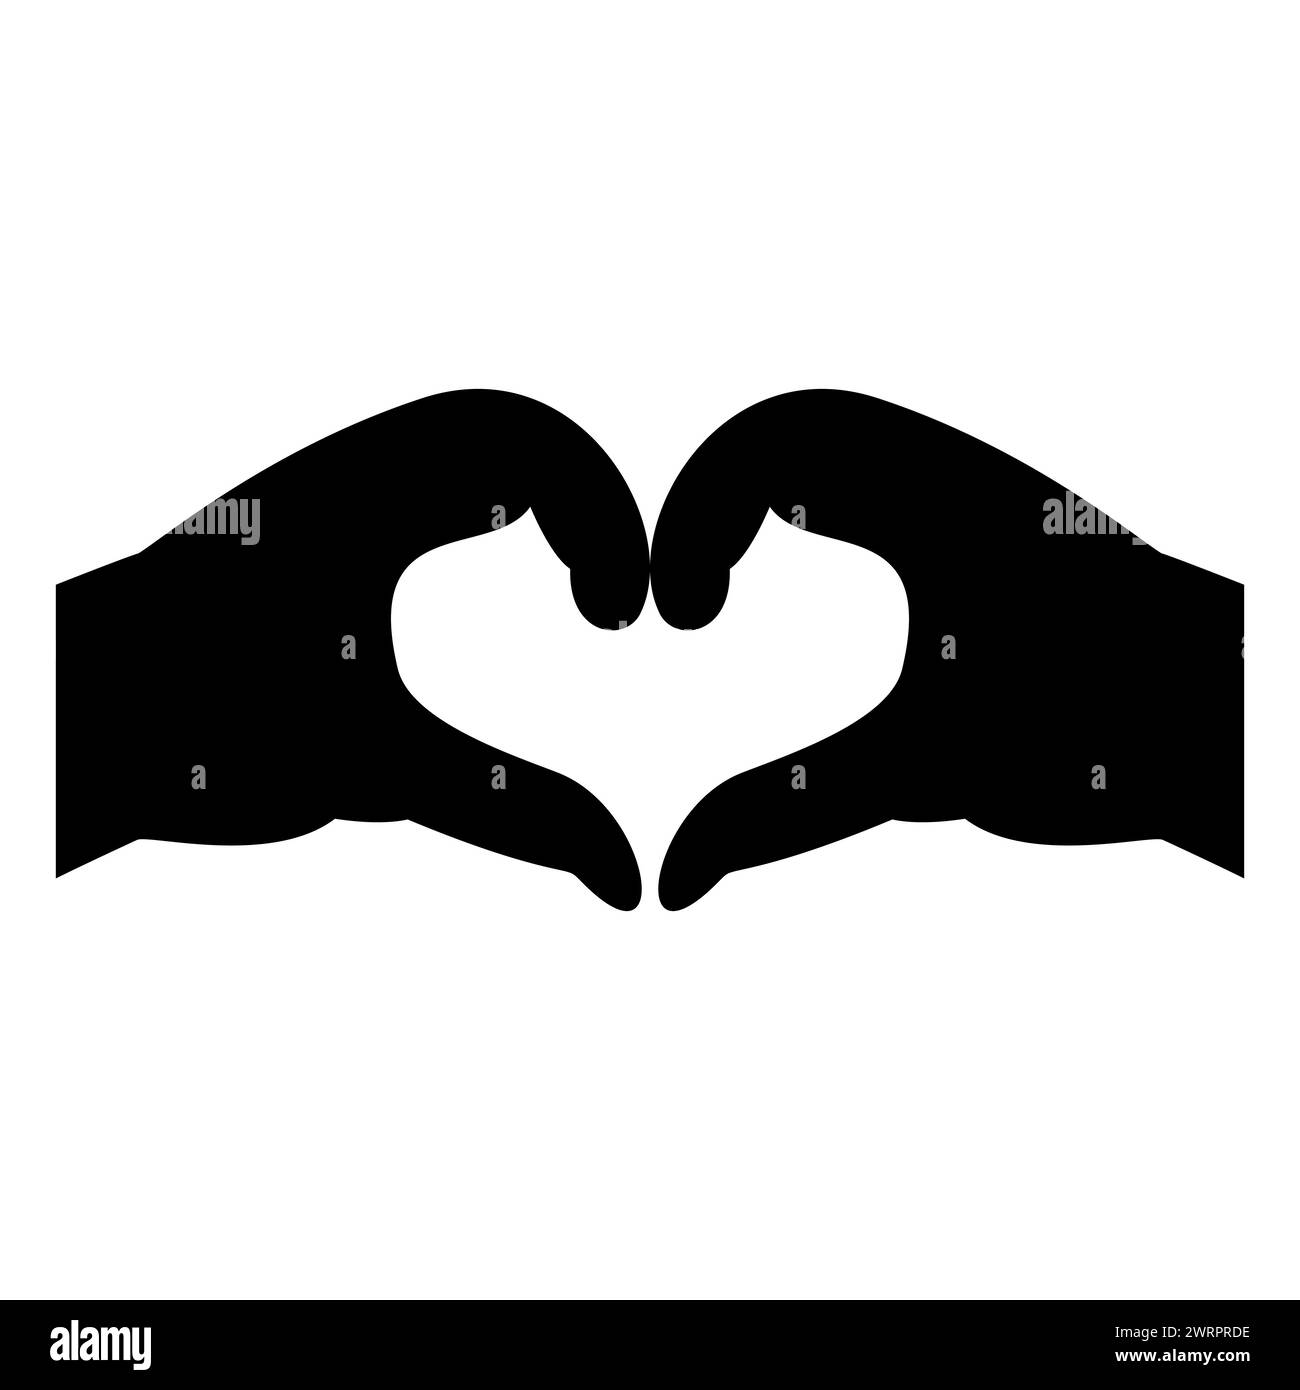 Heart symbol in hand. Hands up with hearts. Heart in hand. Vector icon. Charity Silhouette icons. Volunteer Poster. Donation, Love Icons. Stock Vector